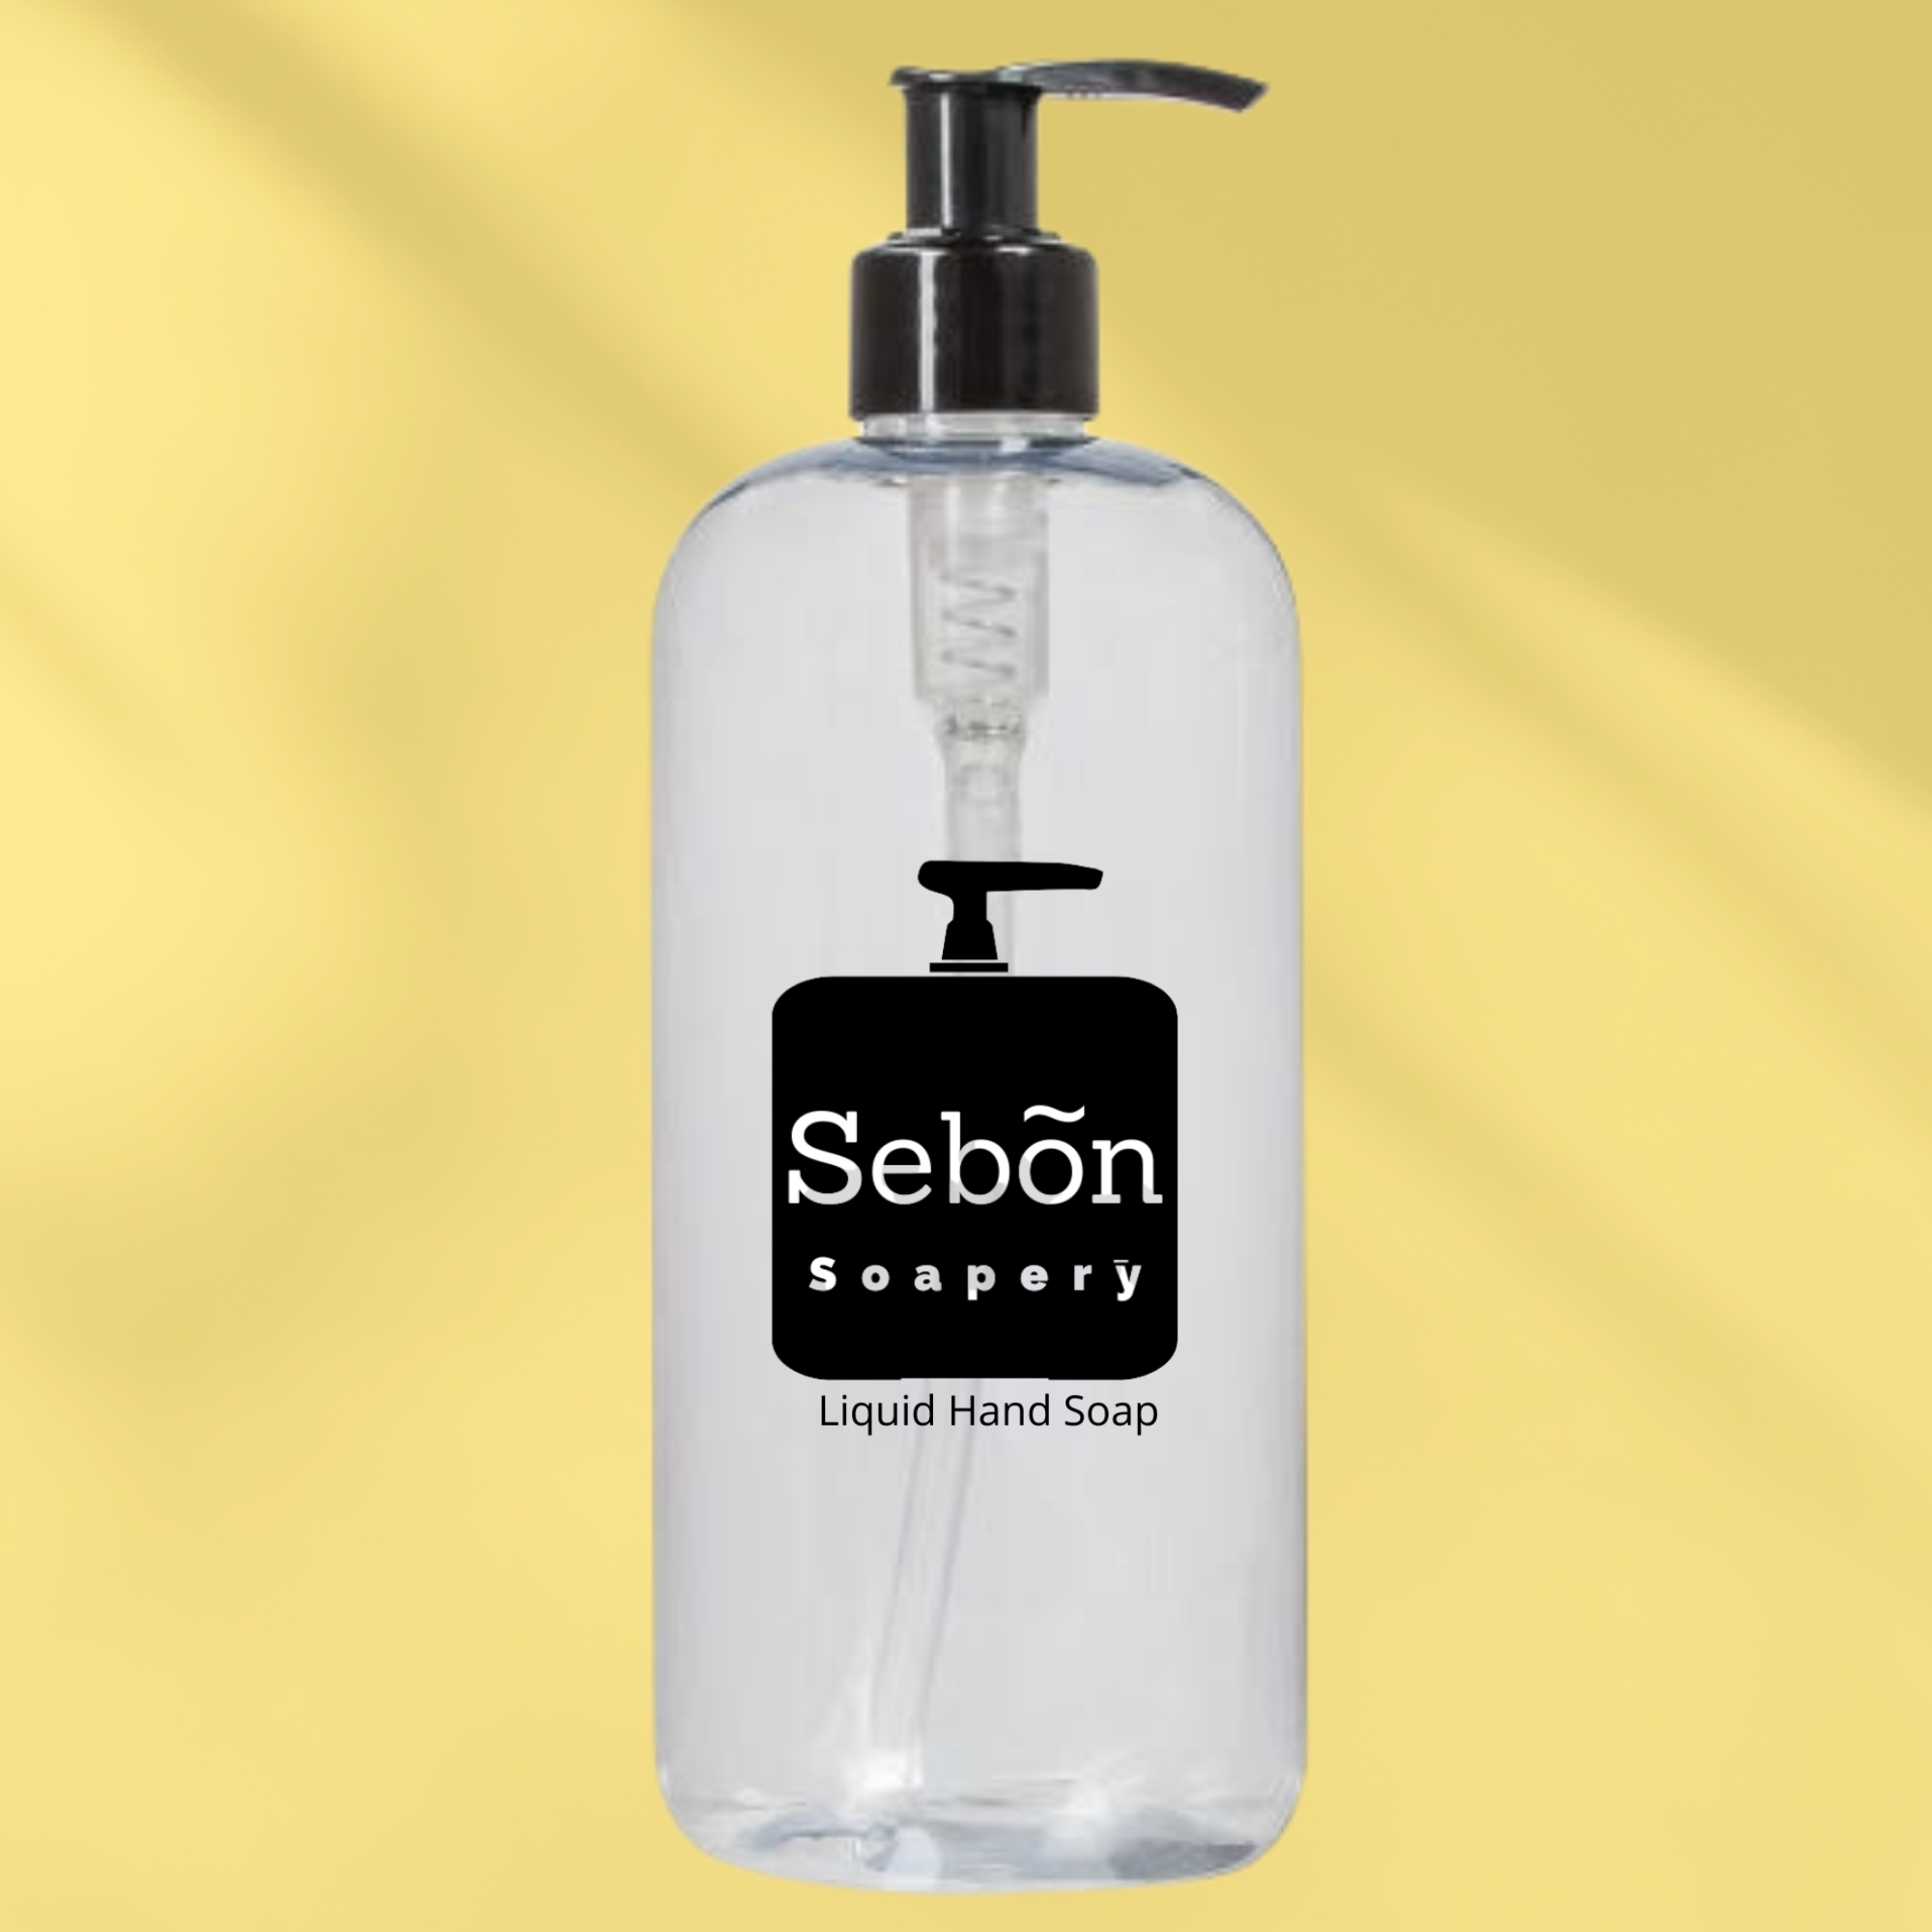 Sebon Key Lime Pie Scented Liquid Hand Soap with Olive Oil